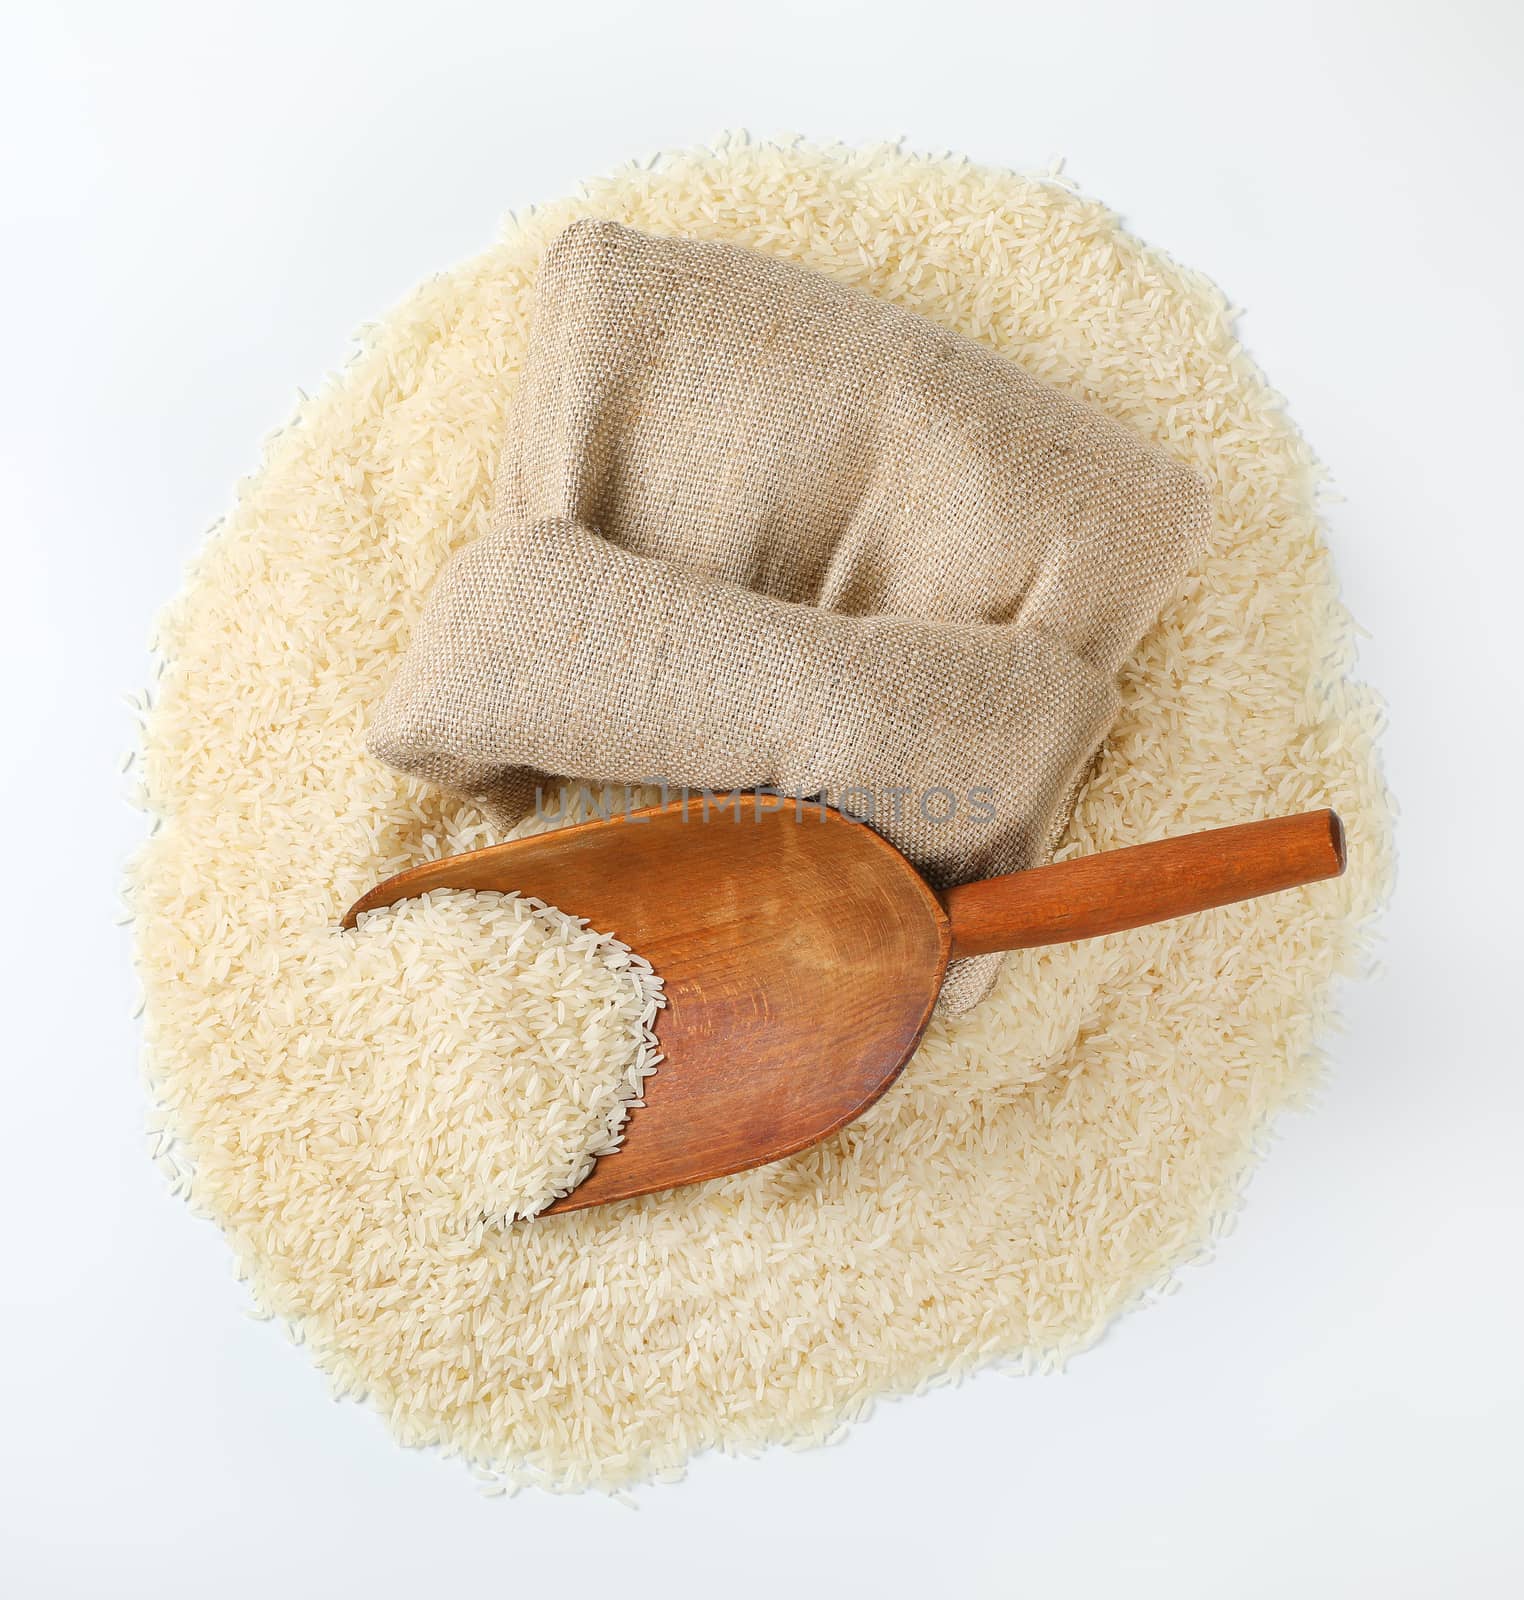 pile of long grained rice, wooden scoop and burlap bag on white background